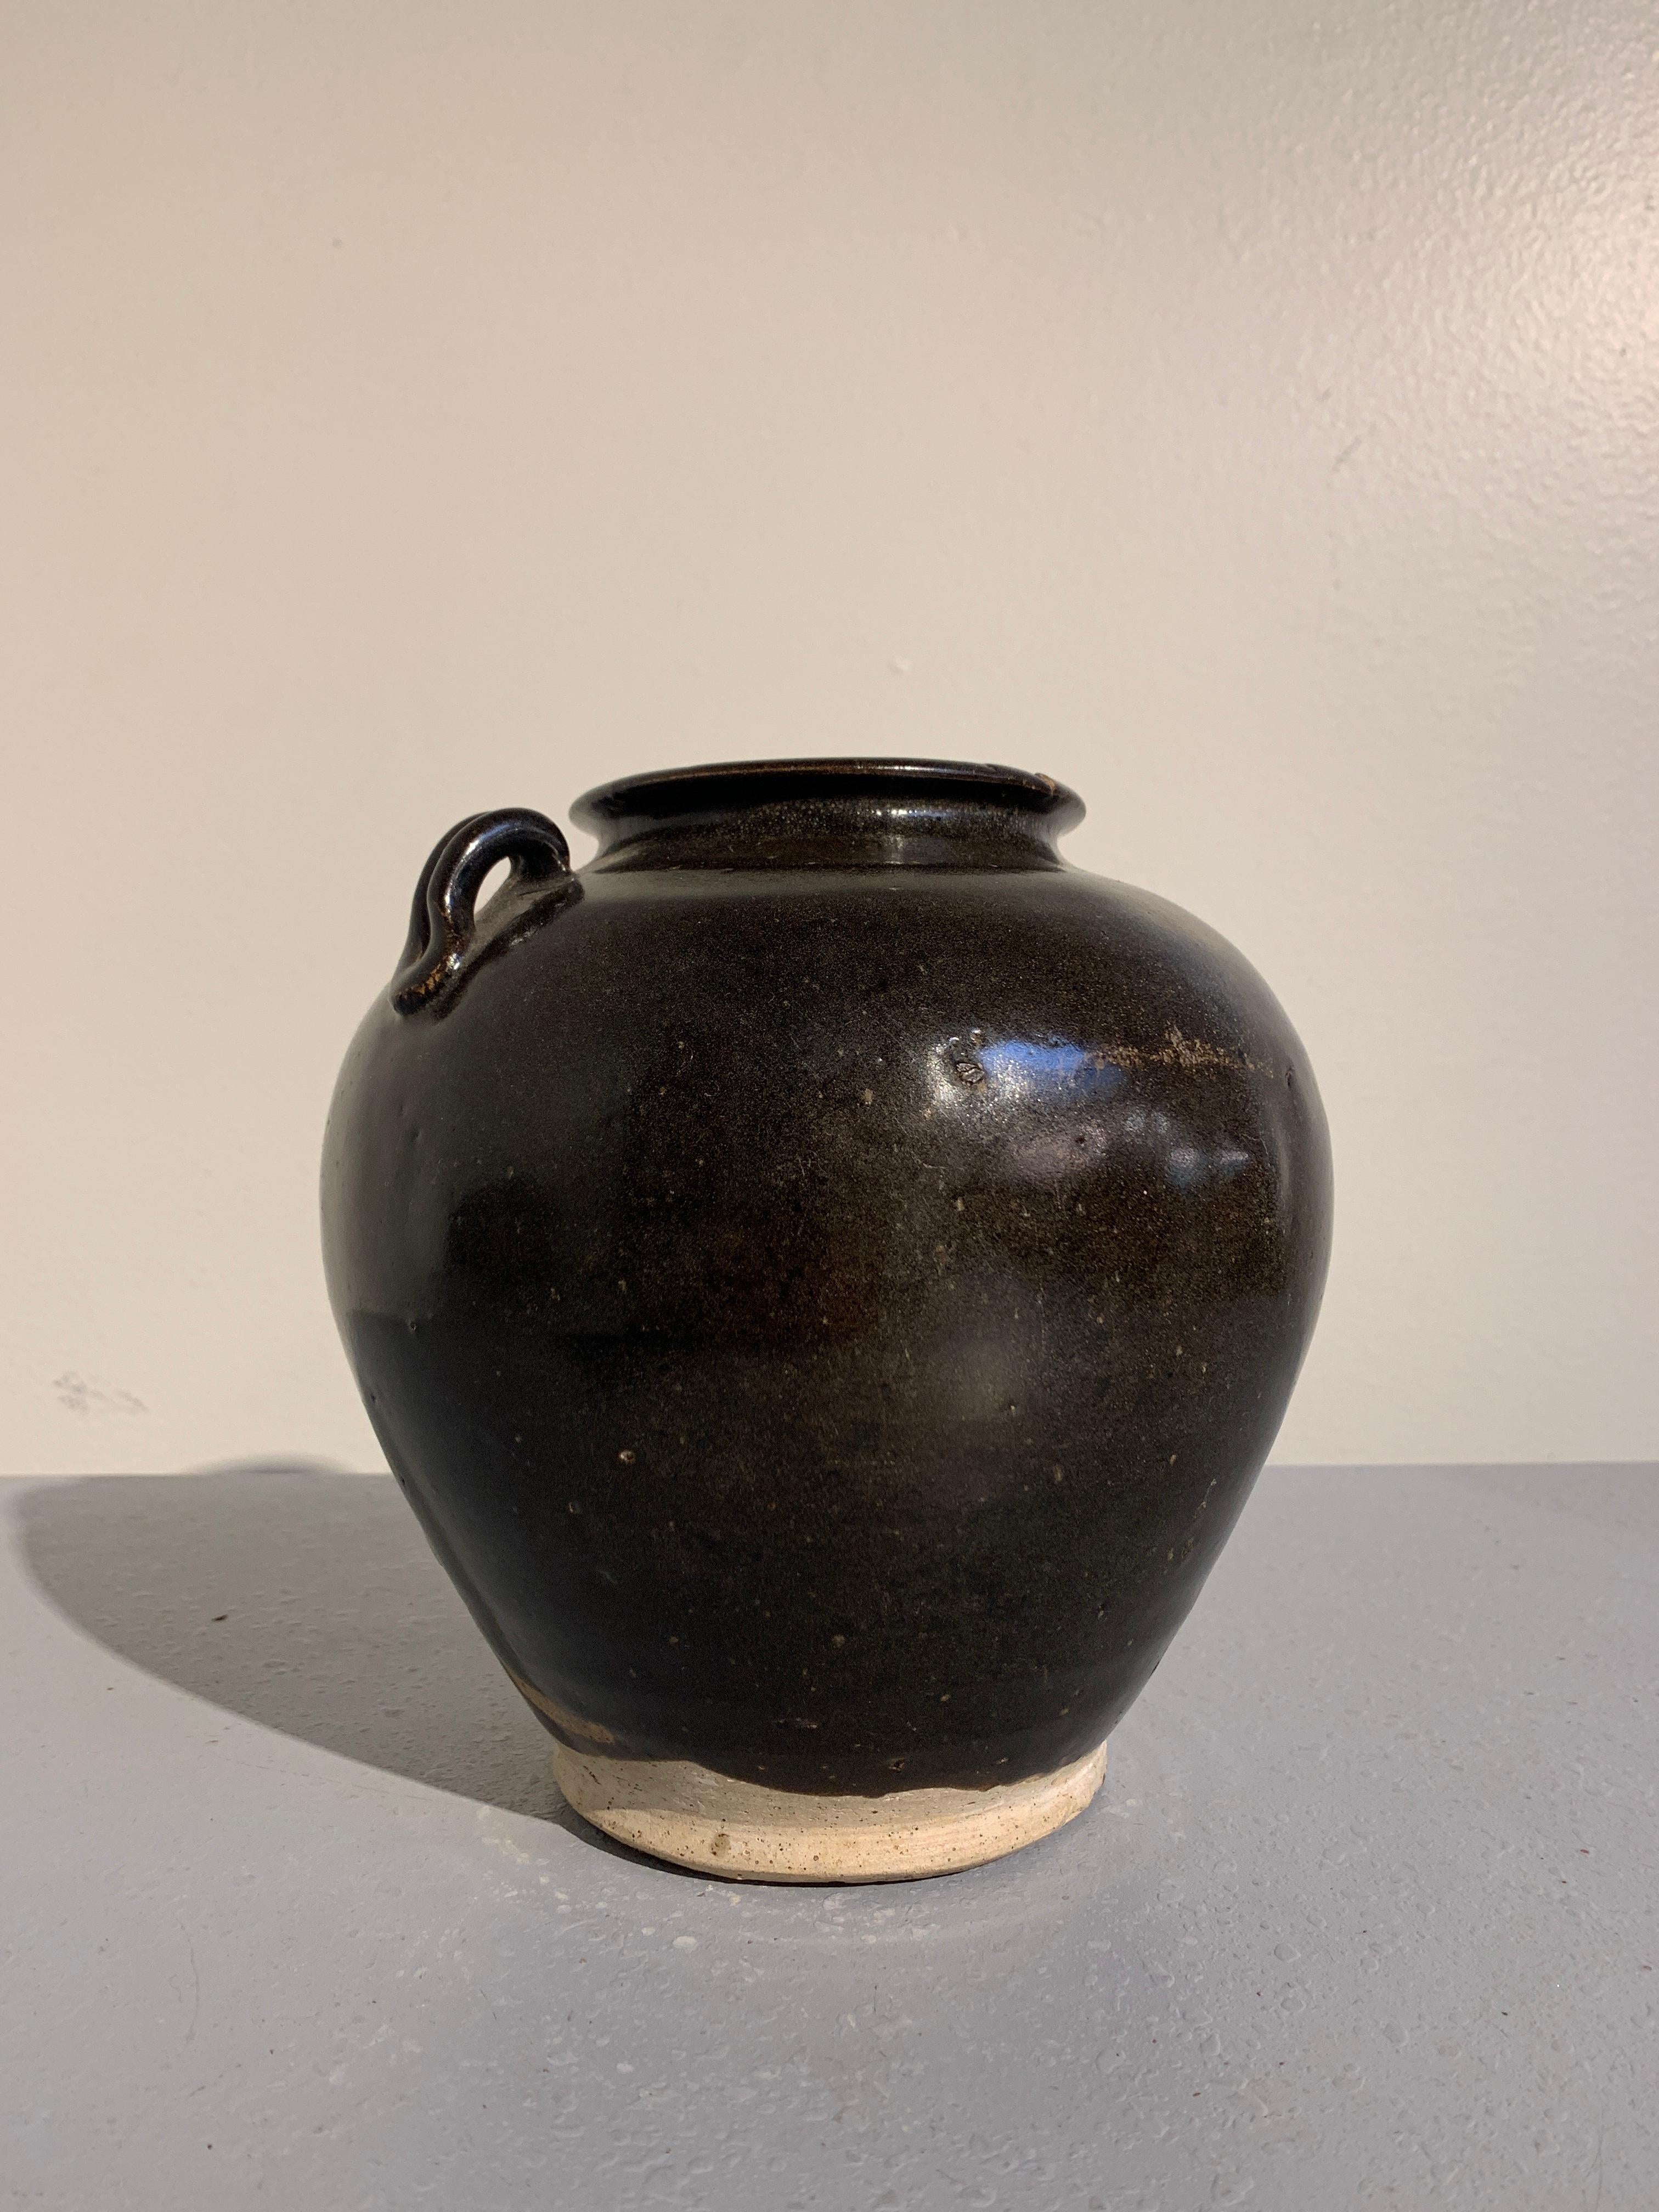 A fine Tang dynasty (618 to 906 AD) brown glazed jar with applied lug handles, circa late 9th or early 10th century, China. 

The jar of somewhat stout proportions, but sill elegantly shaped, with a flat foot and tapered waist rising to broad,